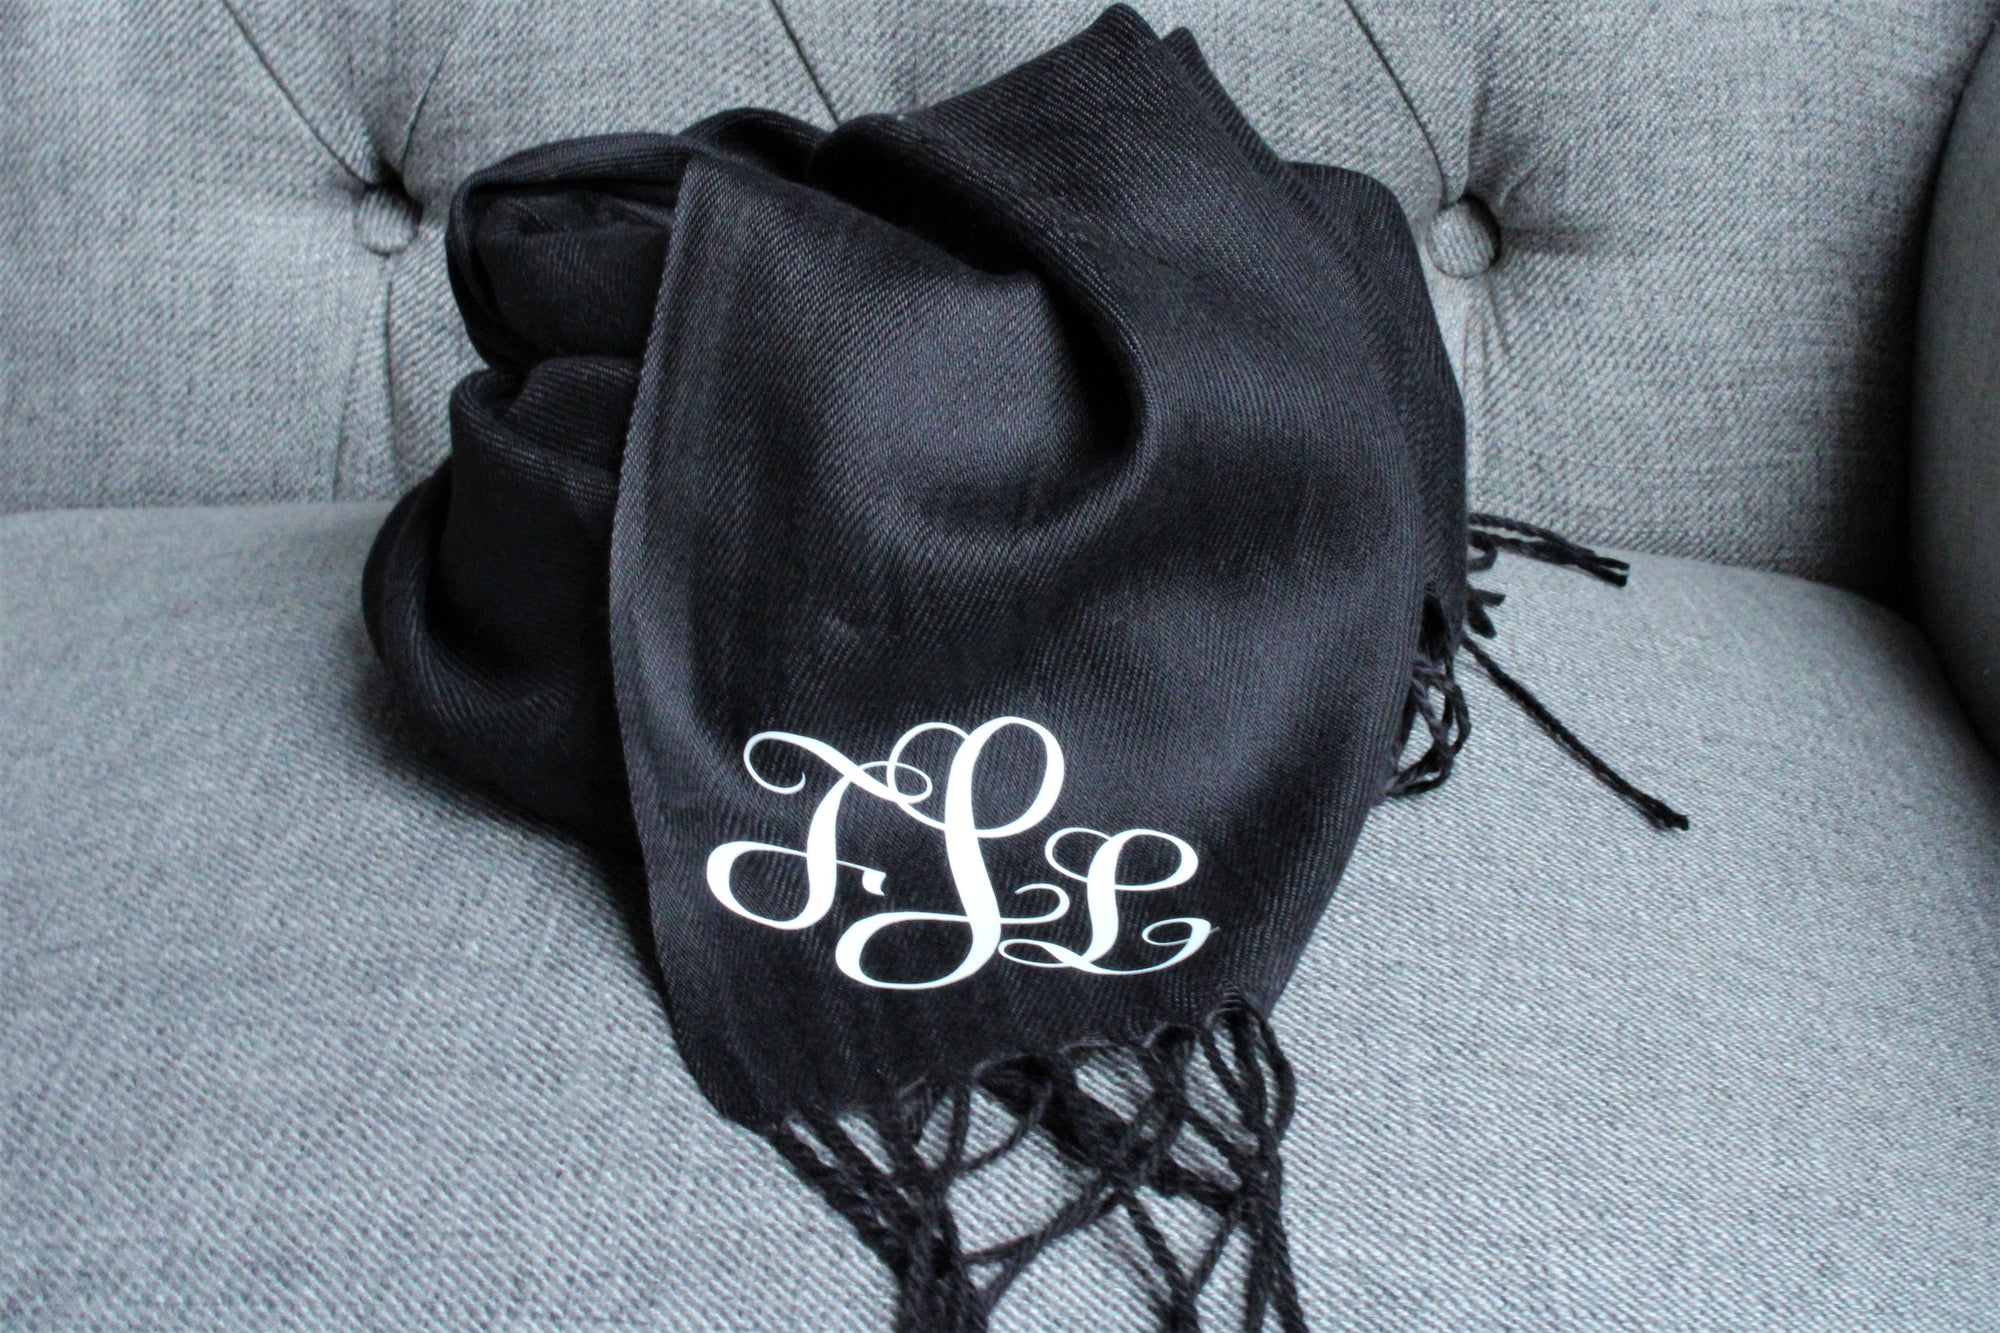 Personalized Grey Scarf Monogrammed 